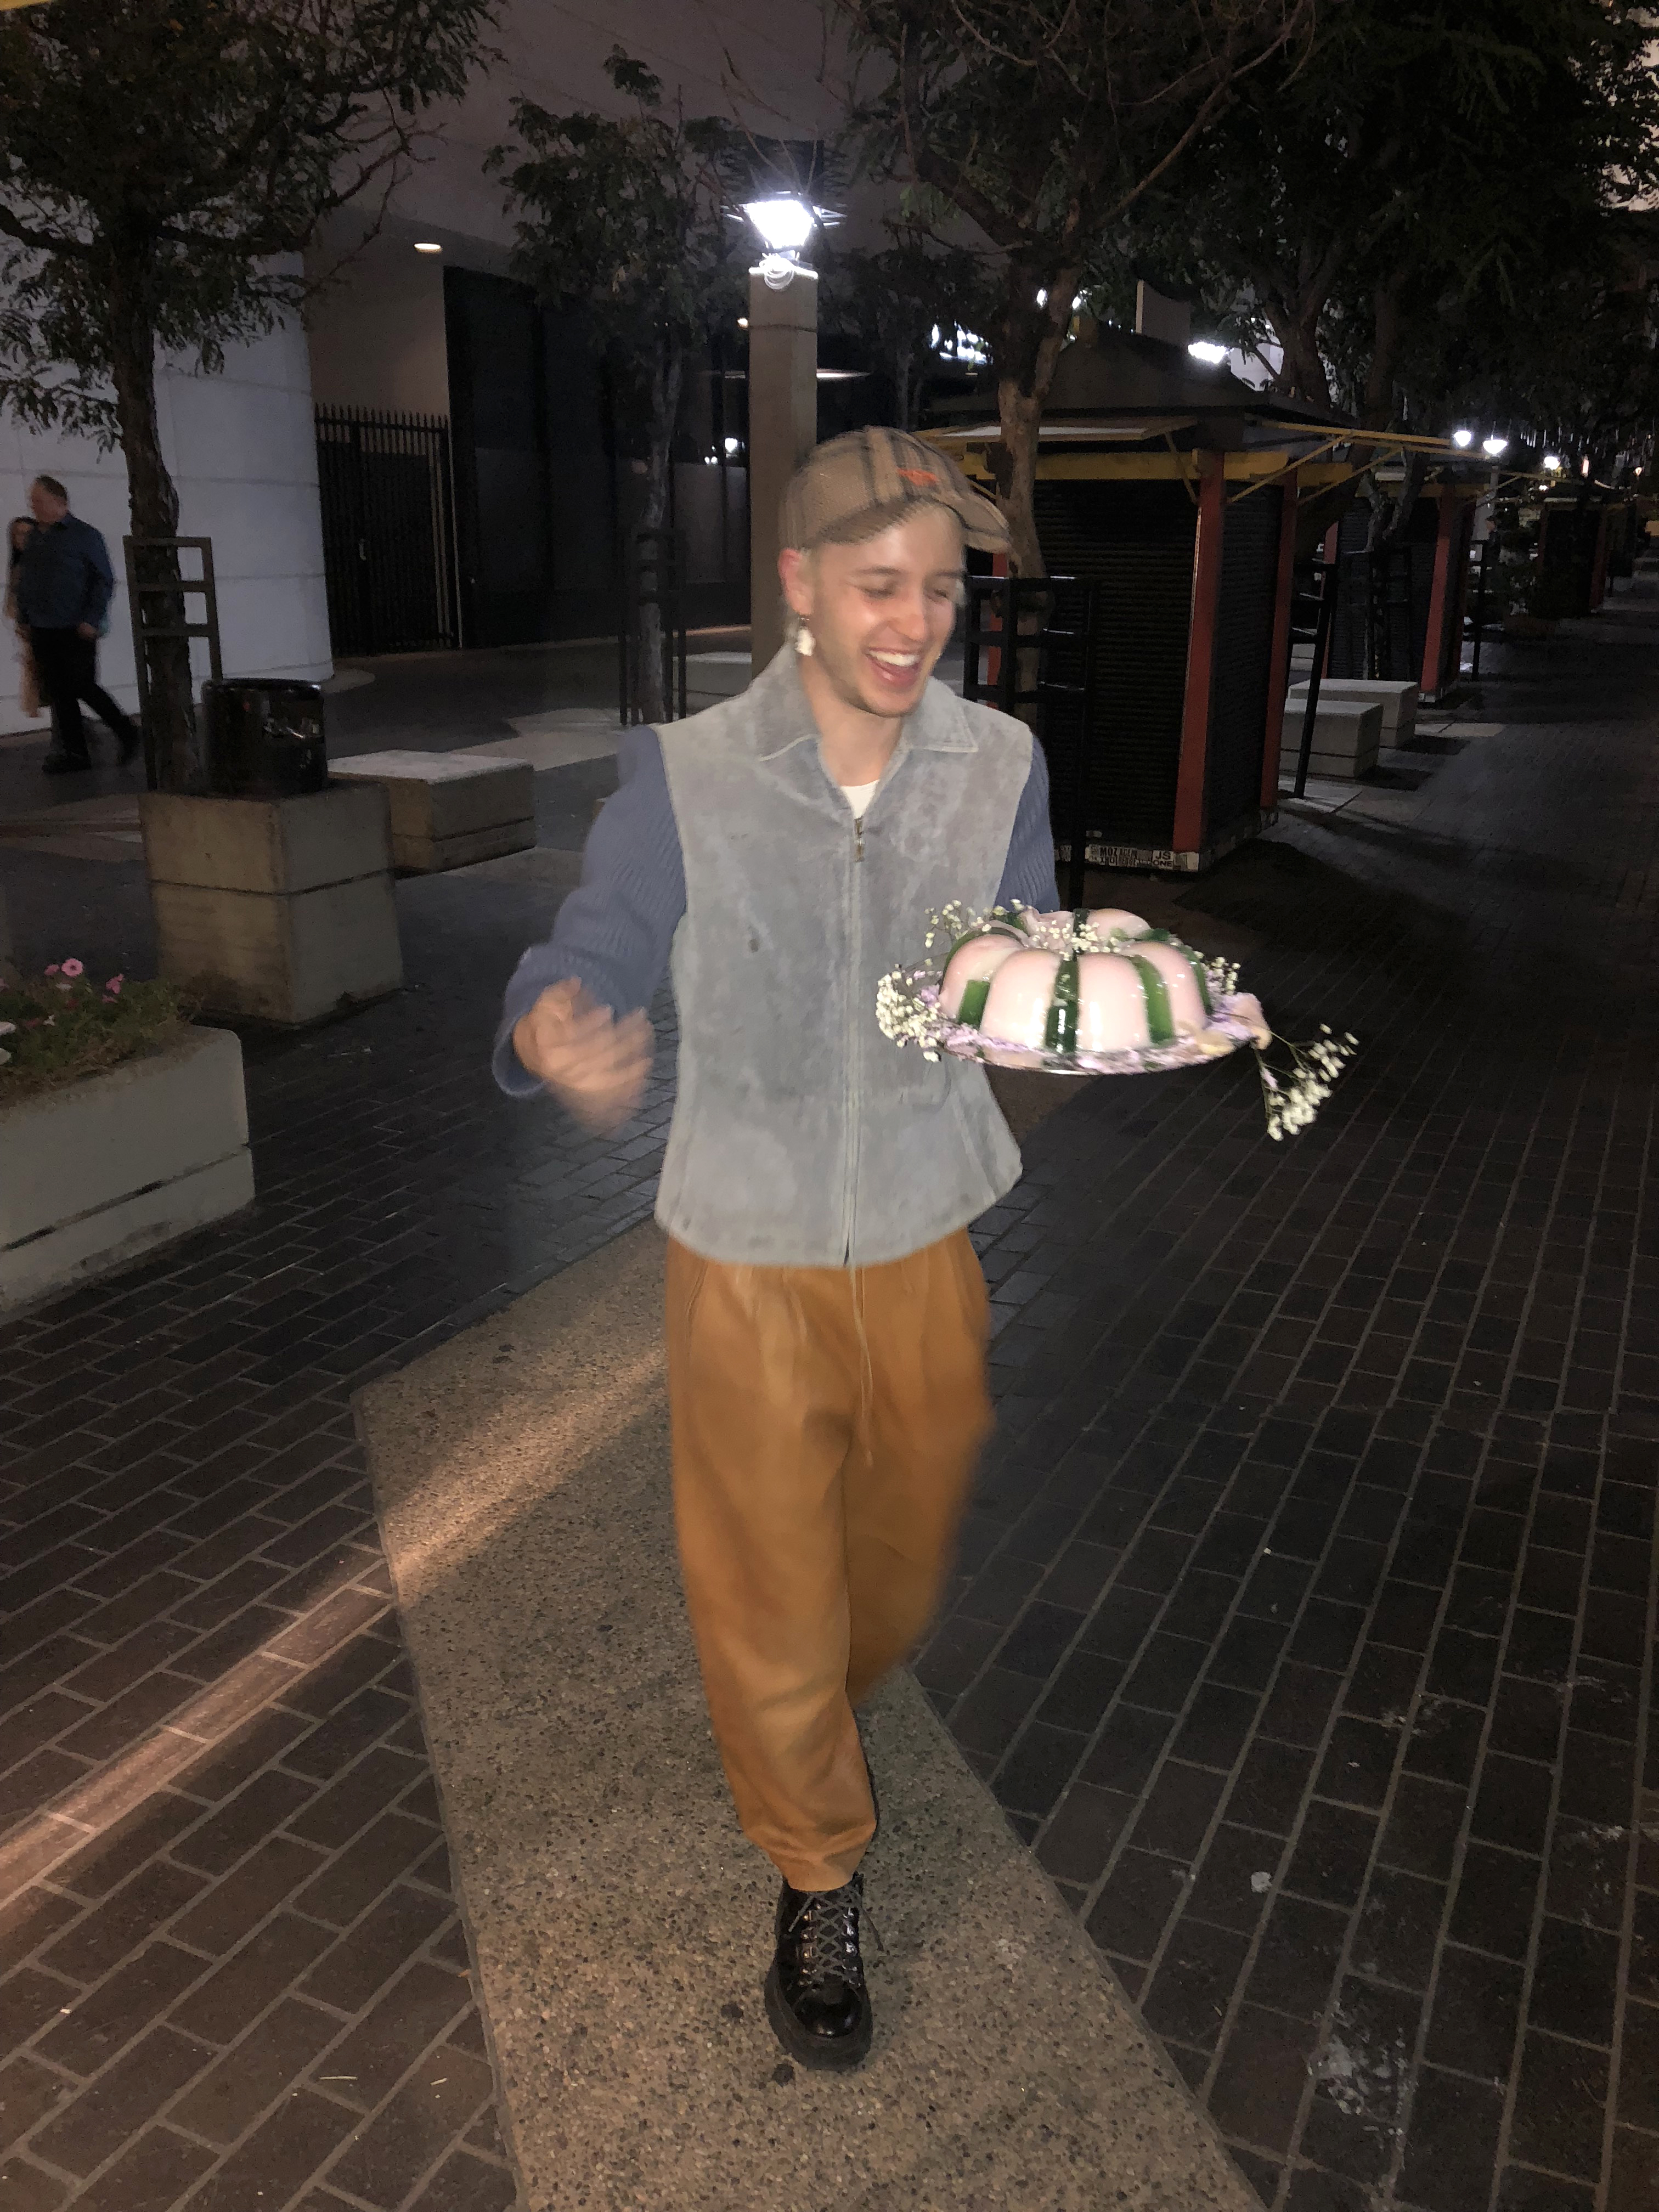 A man holding a jello cake and laughing while walking towards the camera